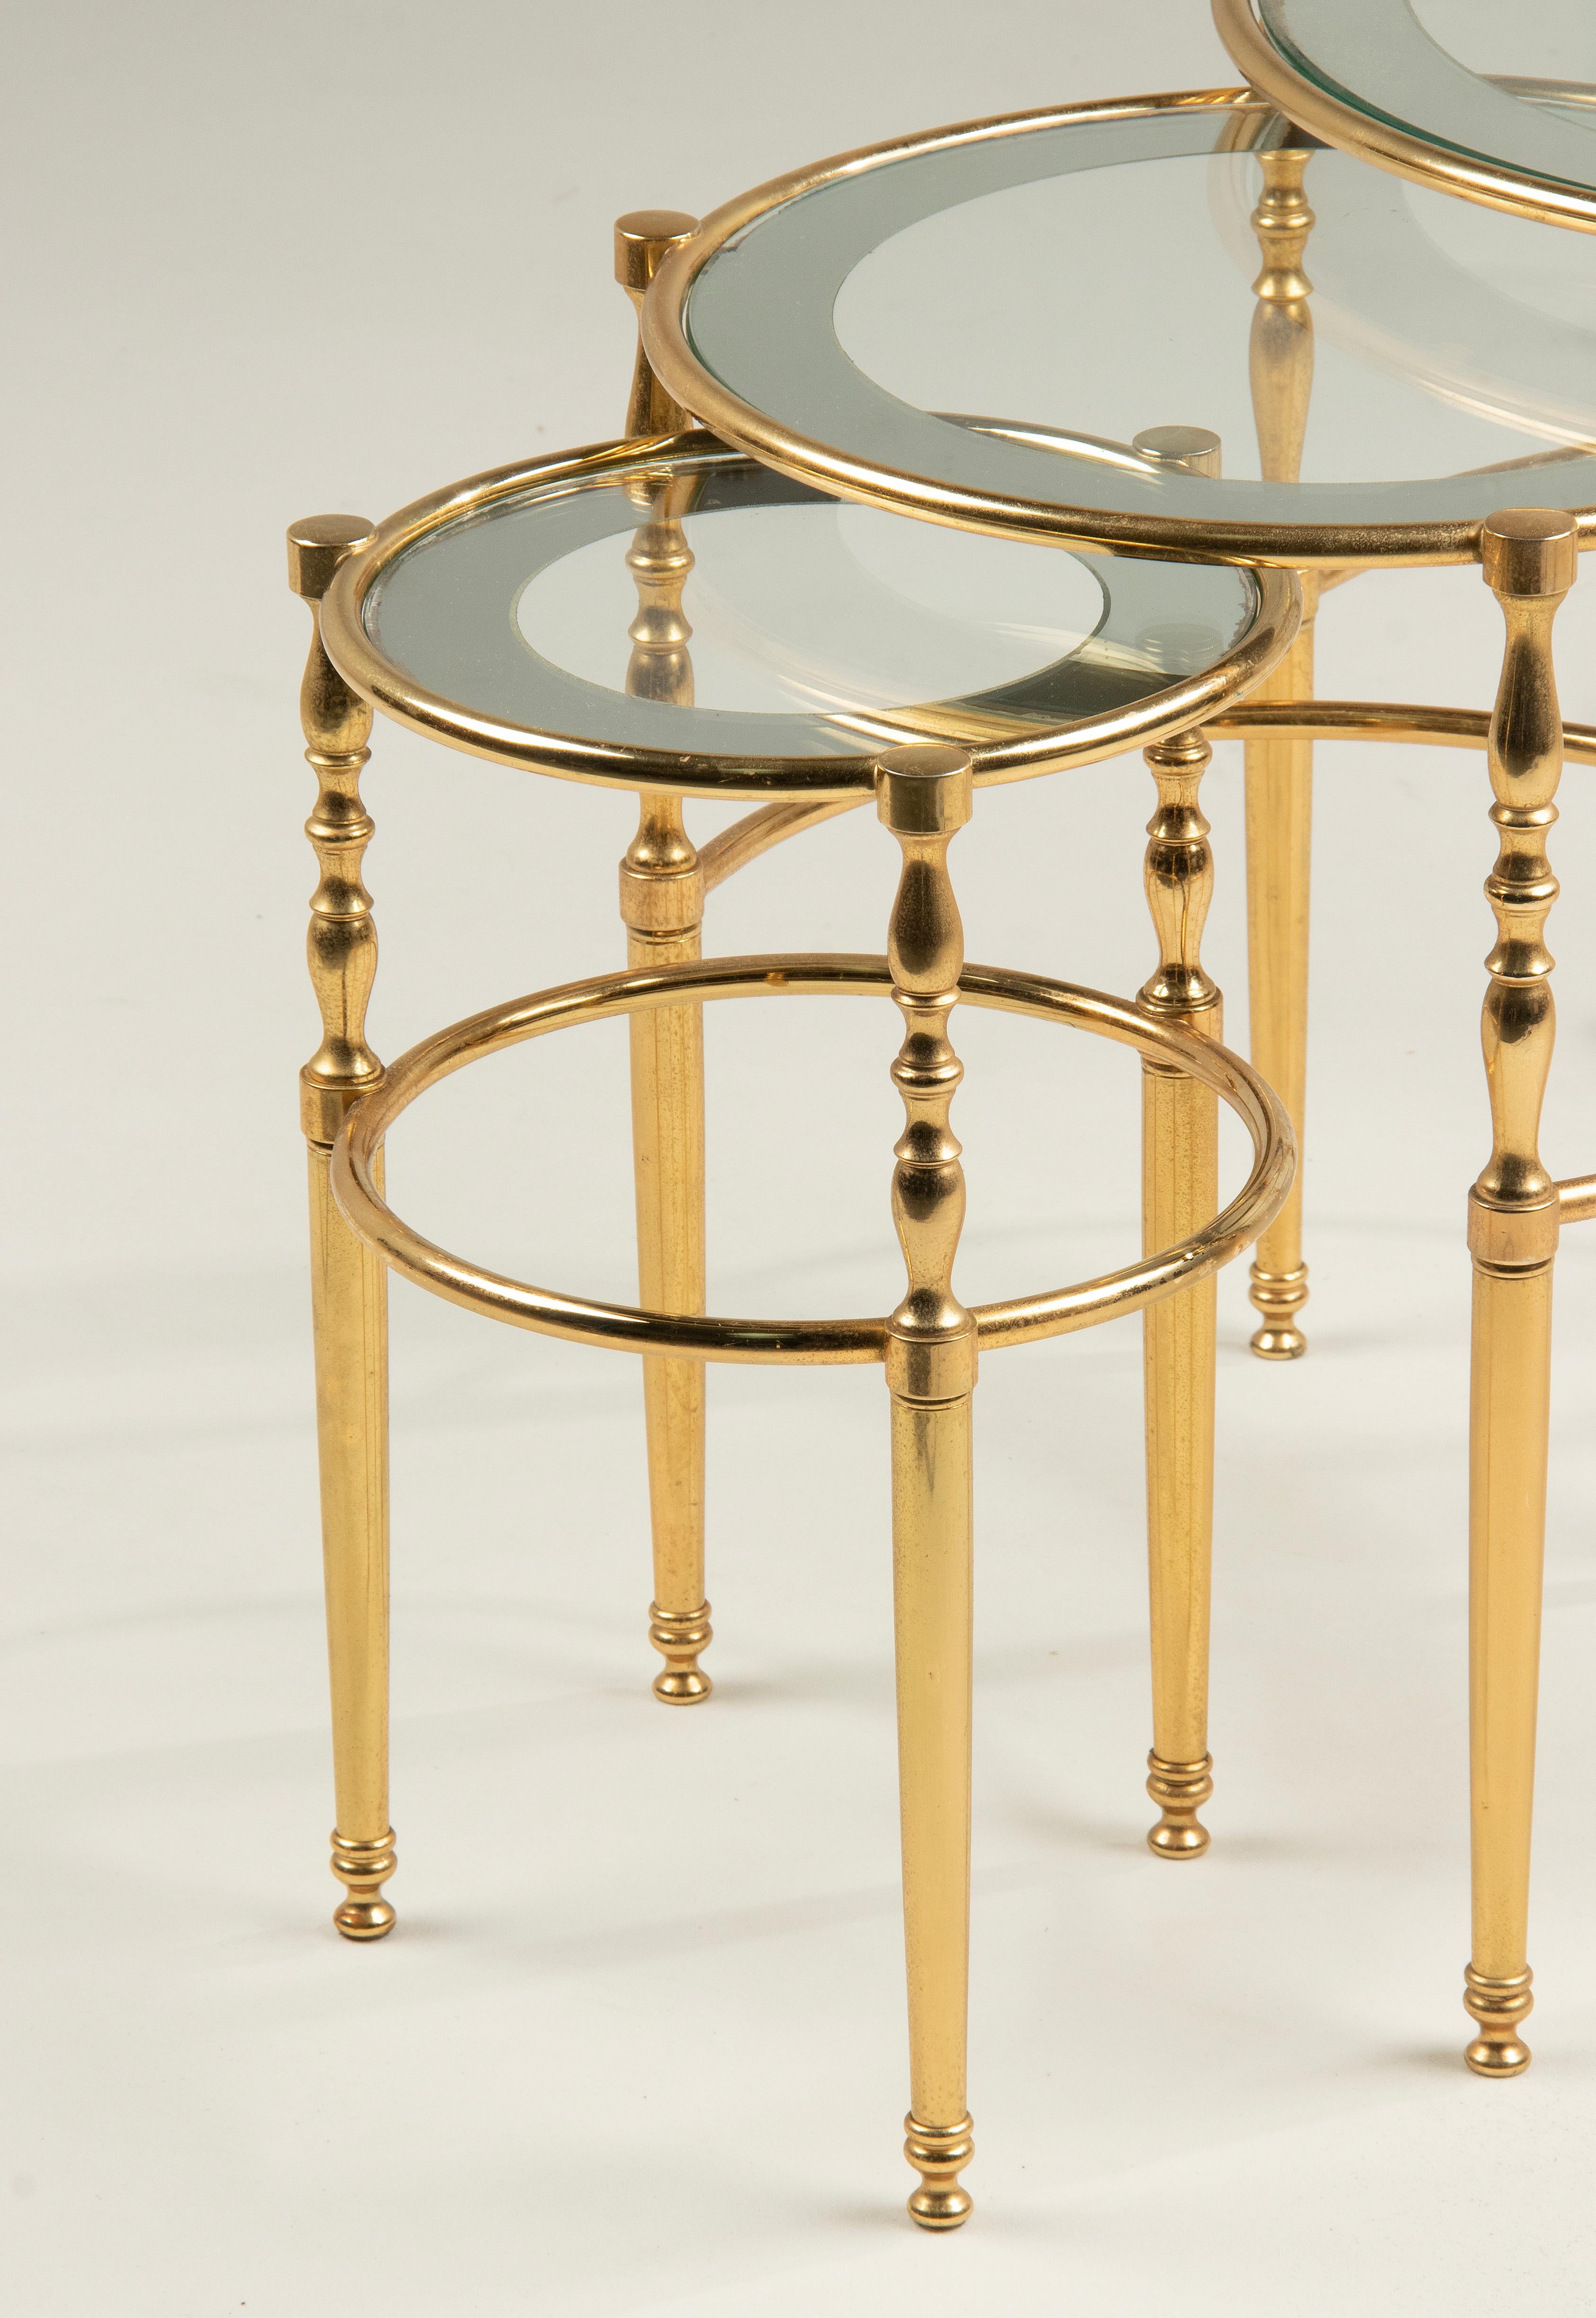 A set of three round Hollywood Regency side tables / nesting tables. The base is made of brass colored metal. Glass tops, with a mirror glass rim. The tables are in good vintage condition, the mirror edges have wear underside the mirror glass, see